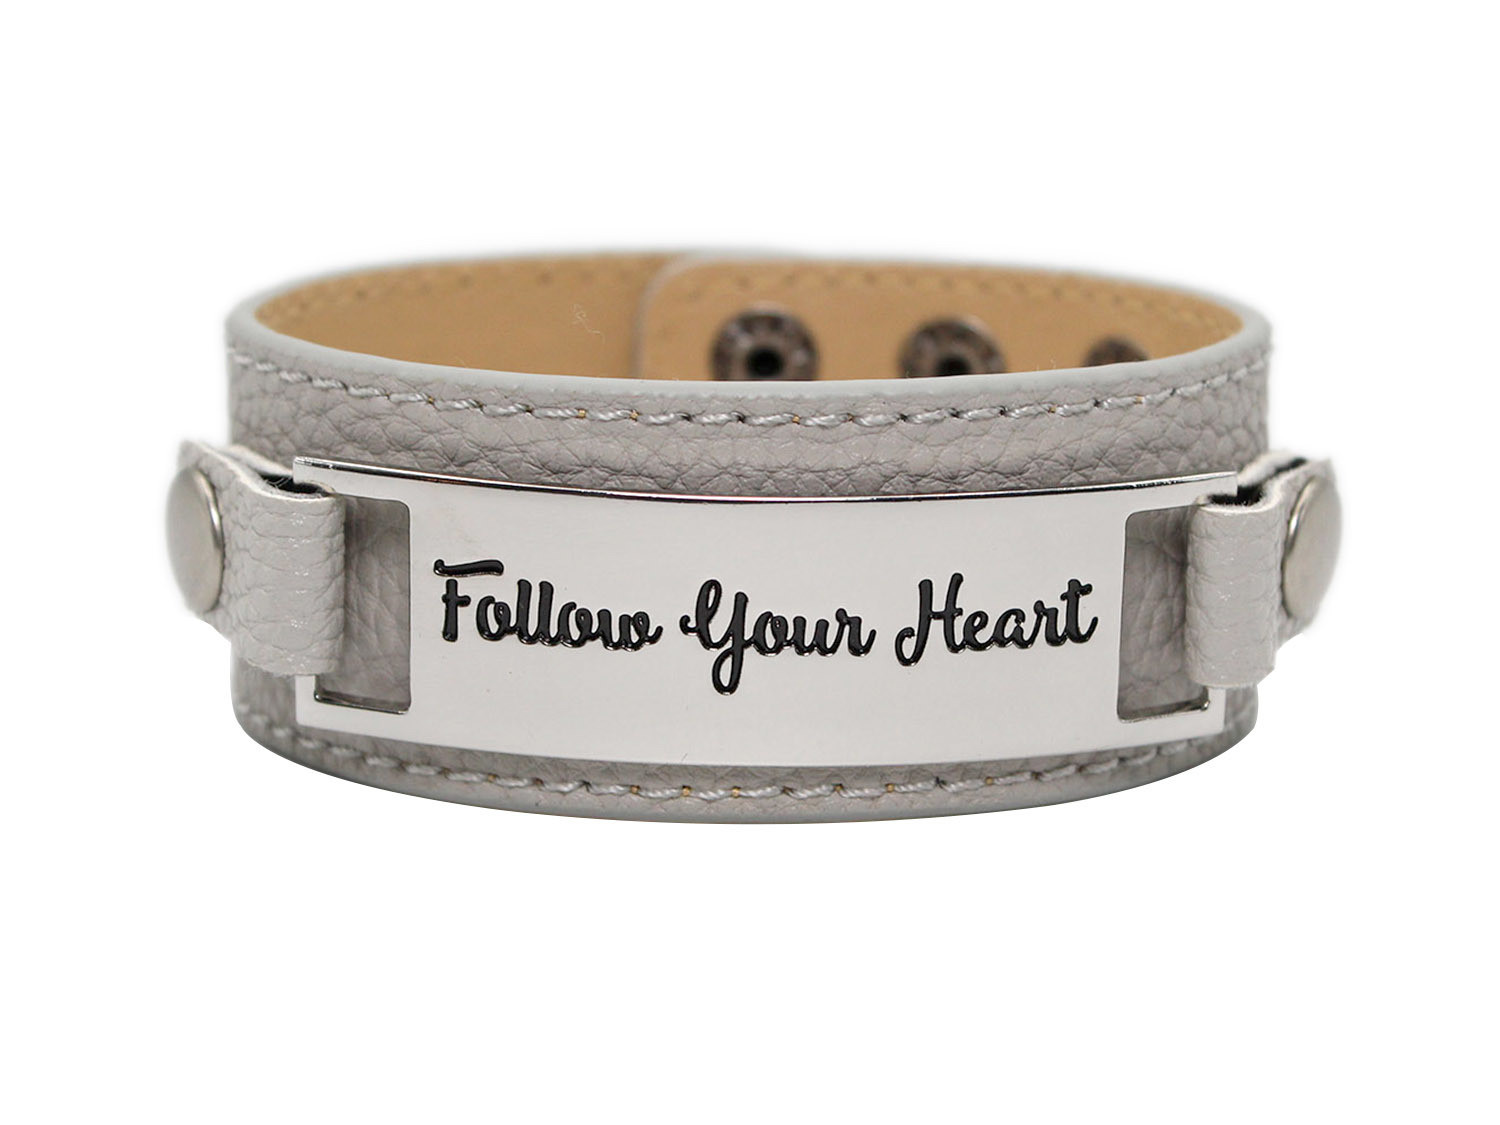 Classic Cuff with Metal Plaque "Follow Your Heart"